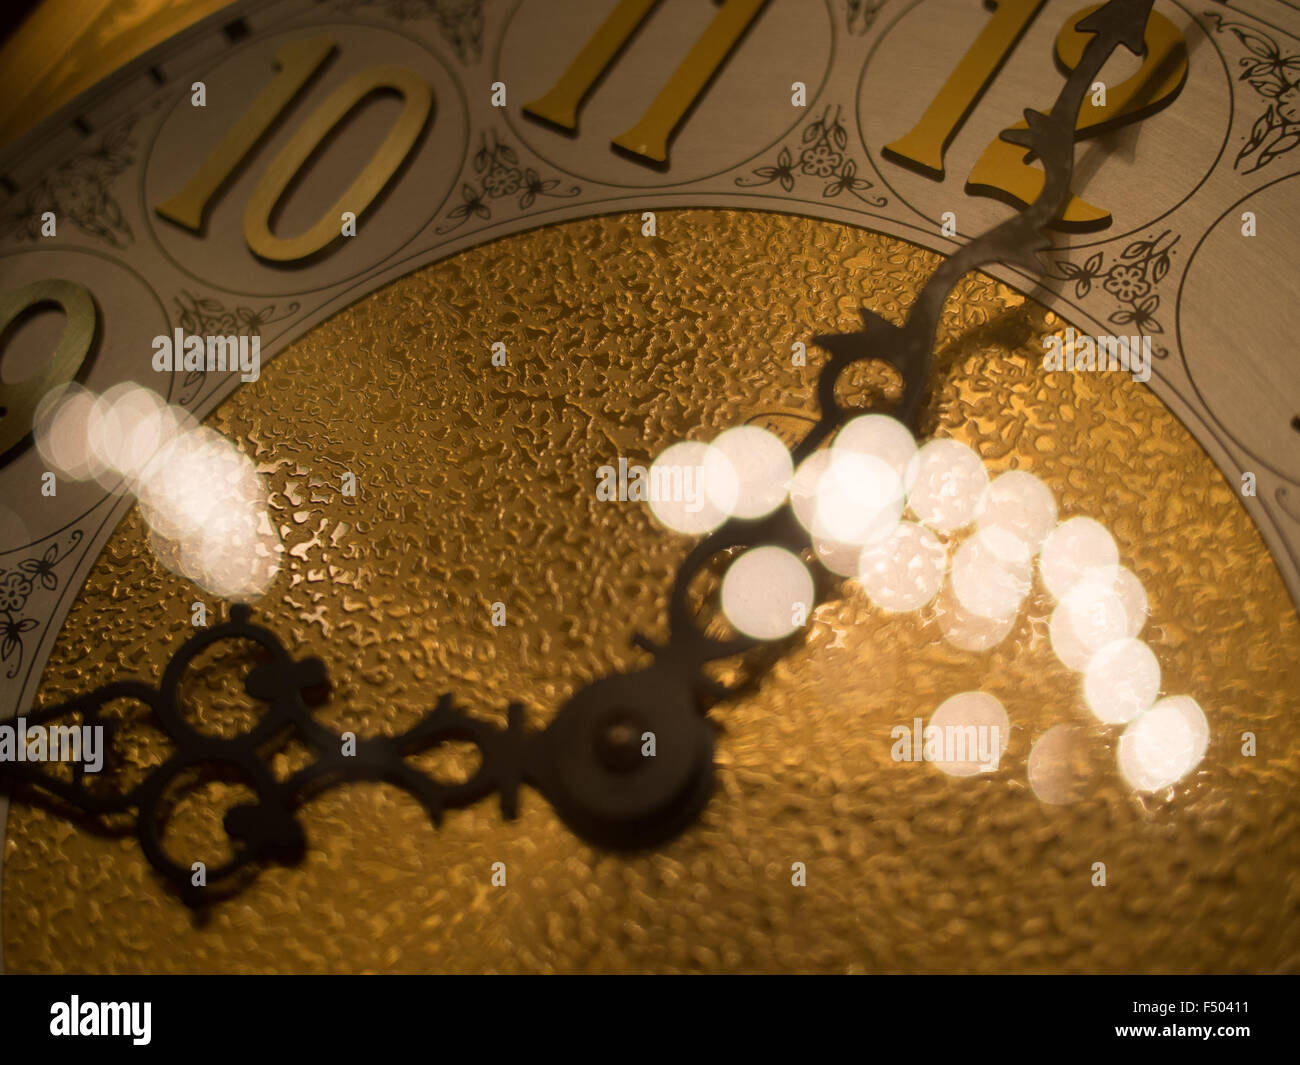 The hands of an old grandfather clock with reflected lights Stock Photo